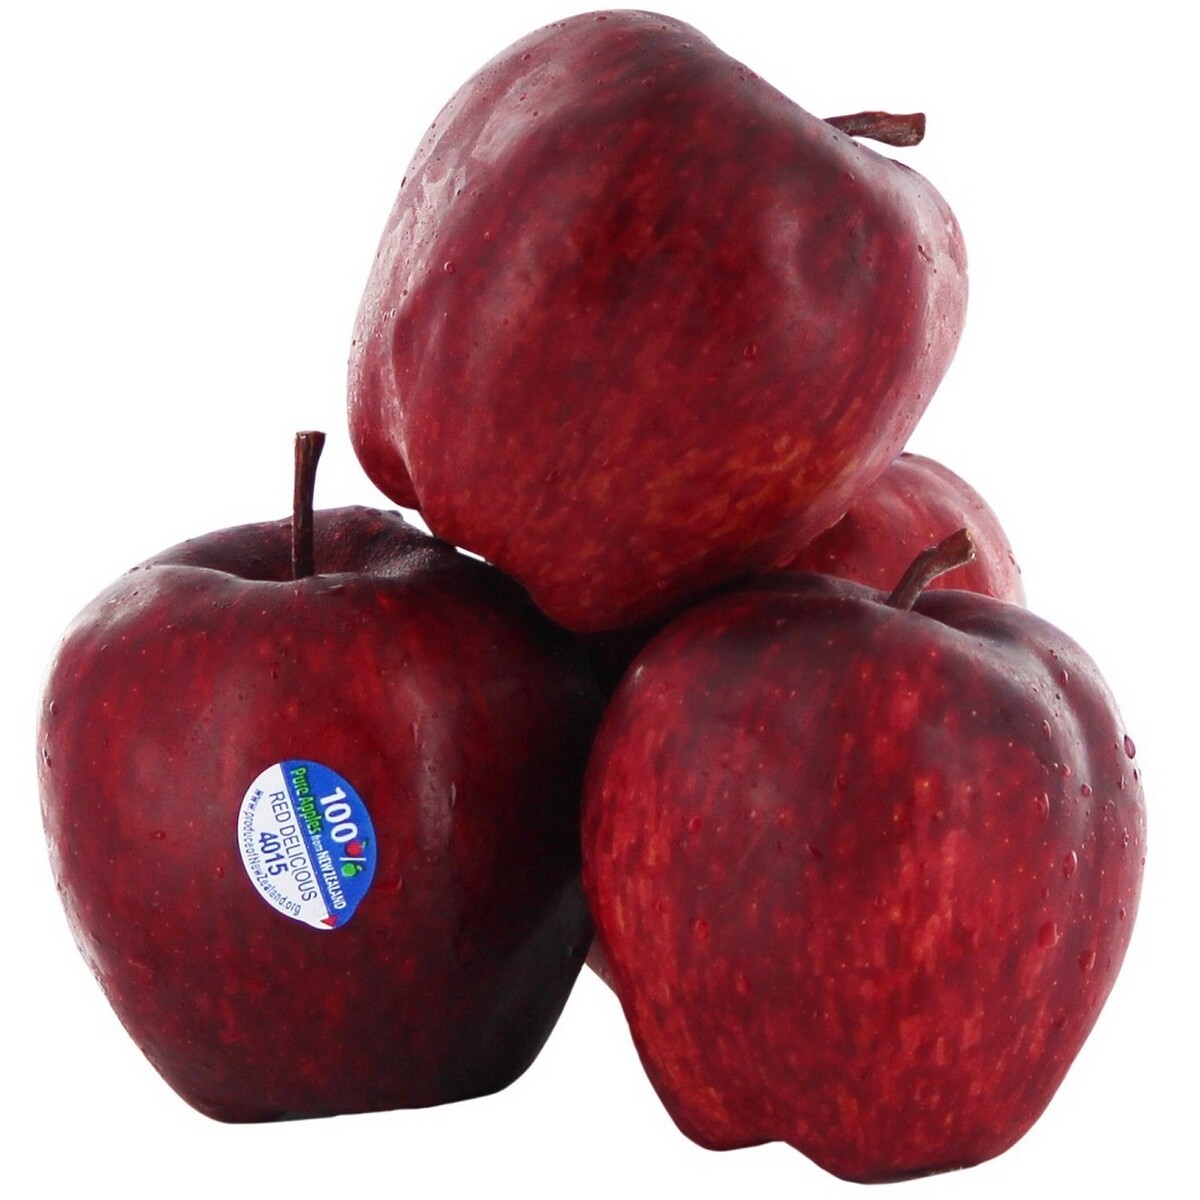 Apple Red New Zealand  approx. 450gm-500gm